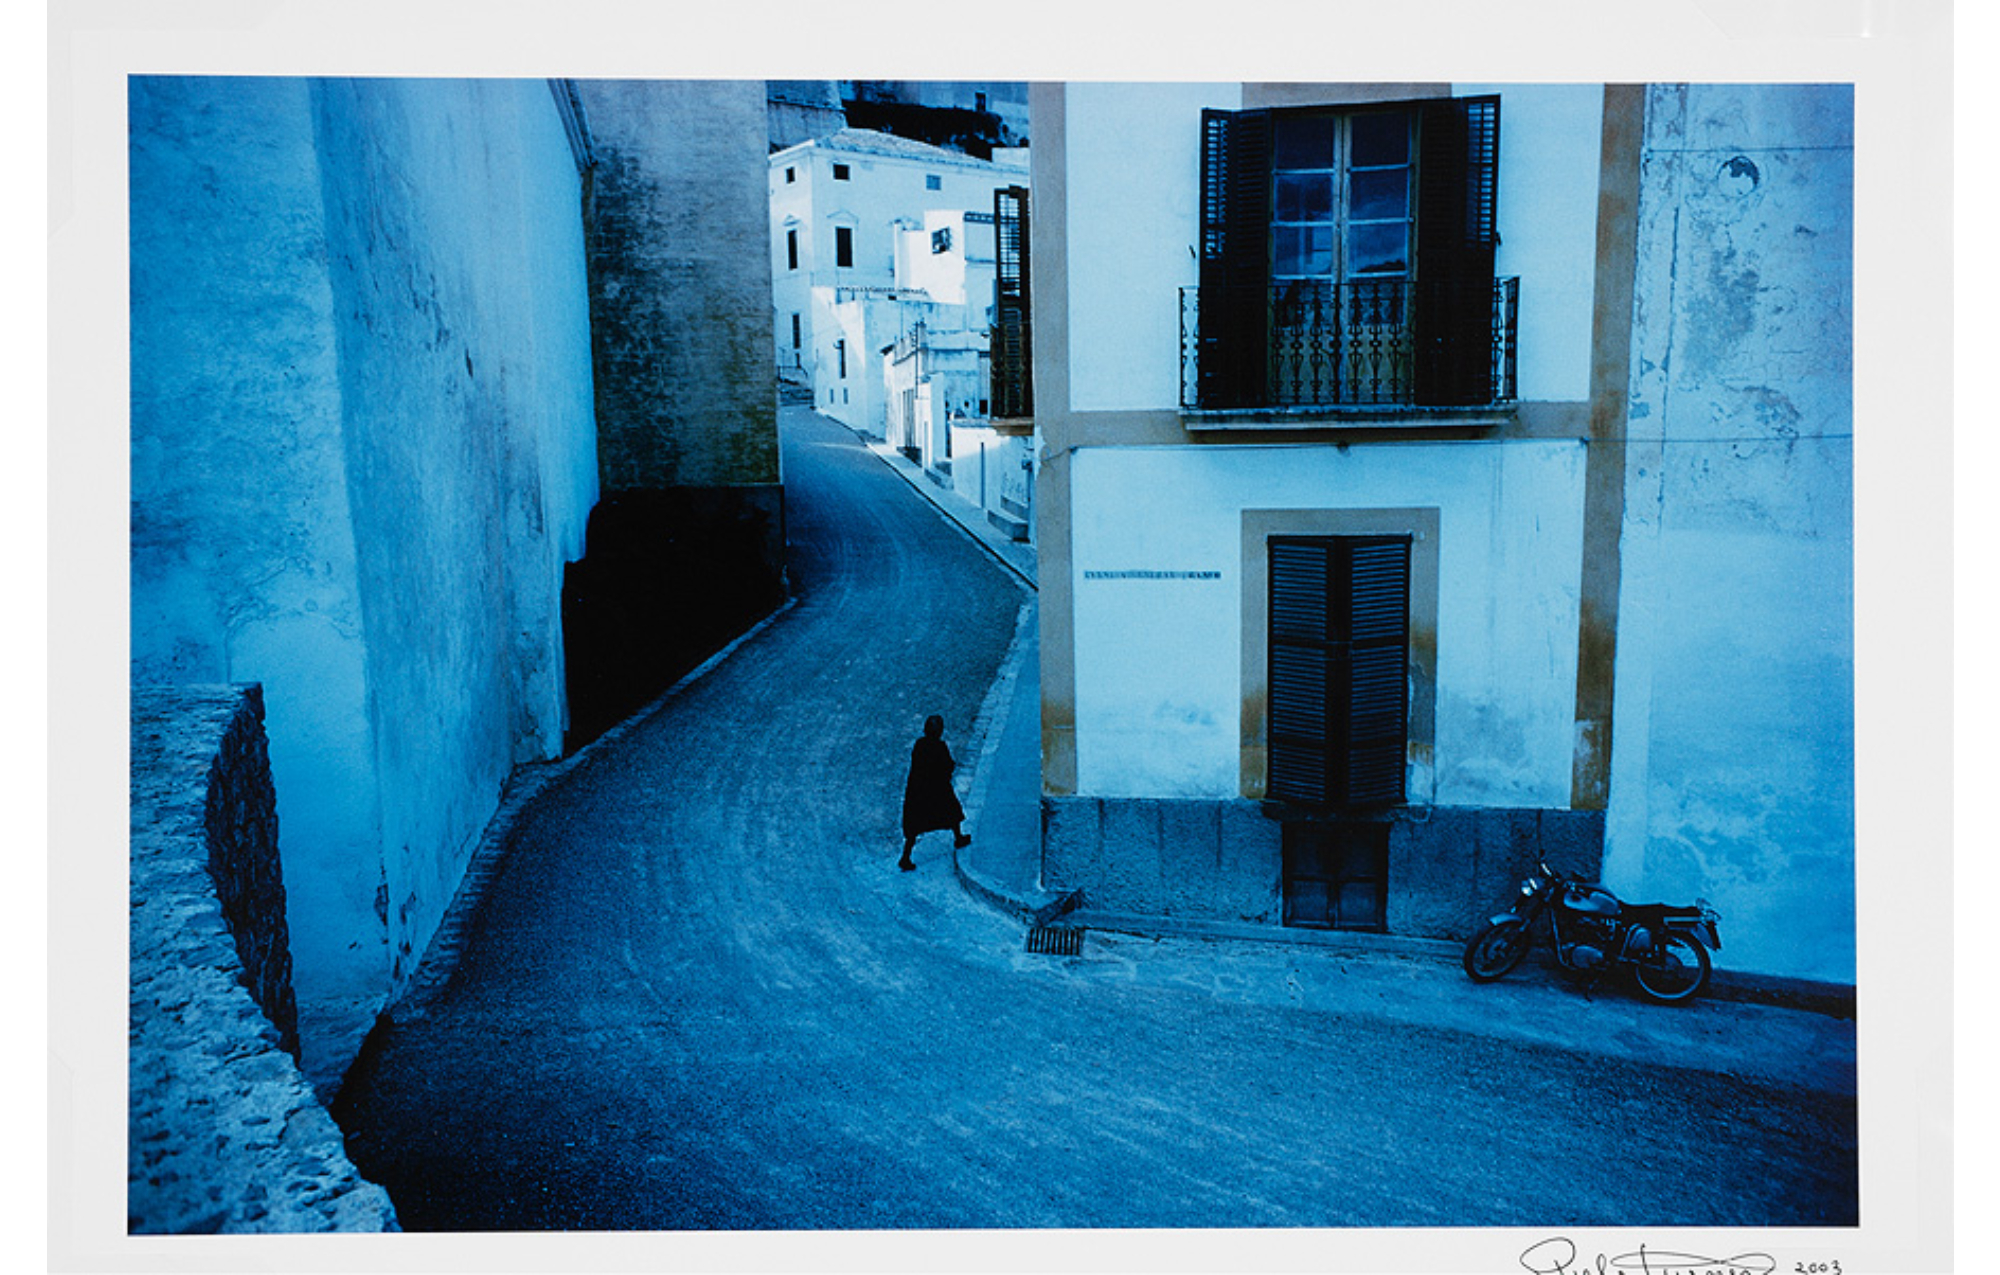 Overall blue tone; curving village street, plain building walls up left side, motorcycle parked near closed windows at lower left, woman in black stepping onto sidewalk at lower center which follows road into picture past small whitewashed box-like houses.